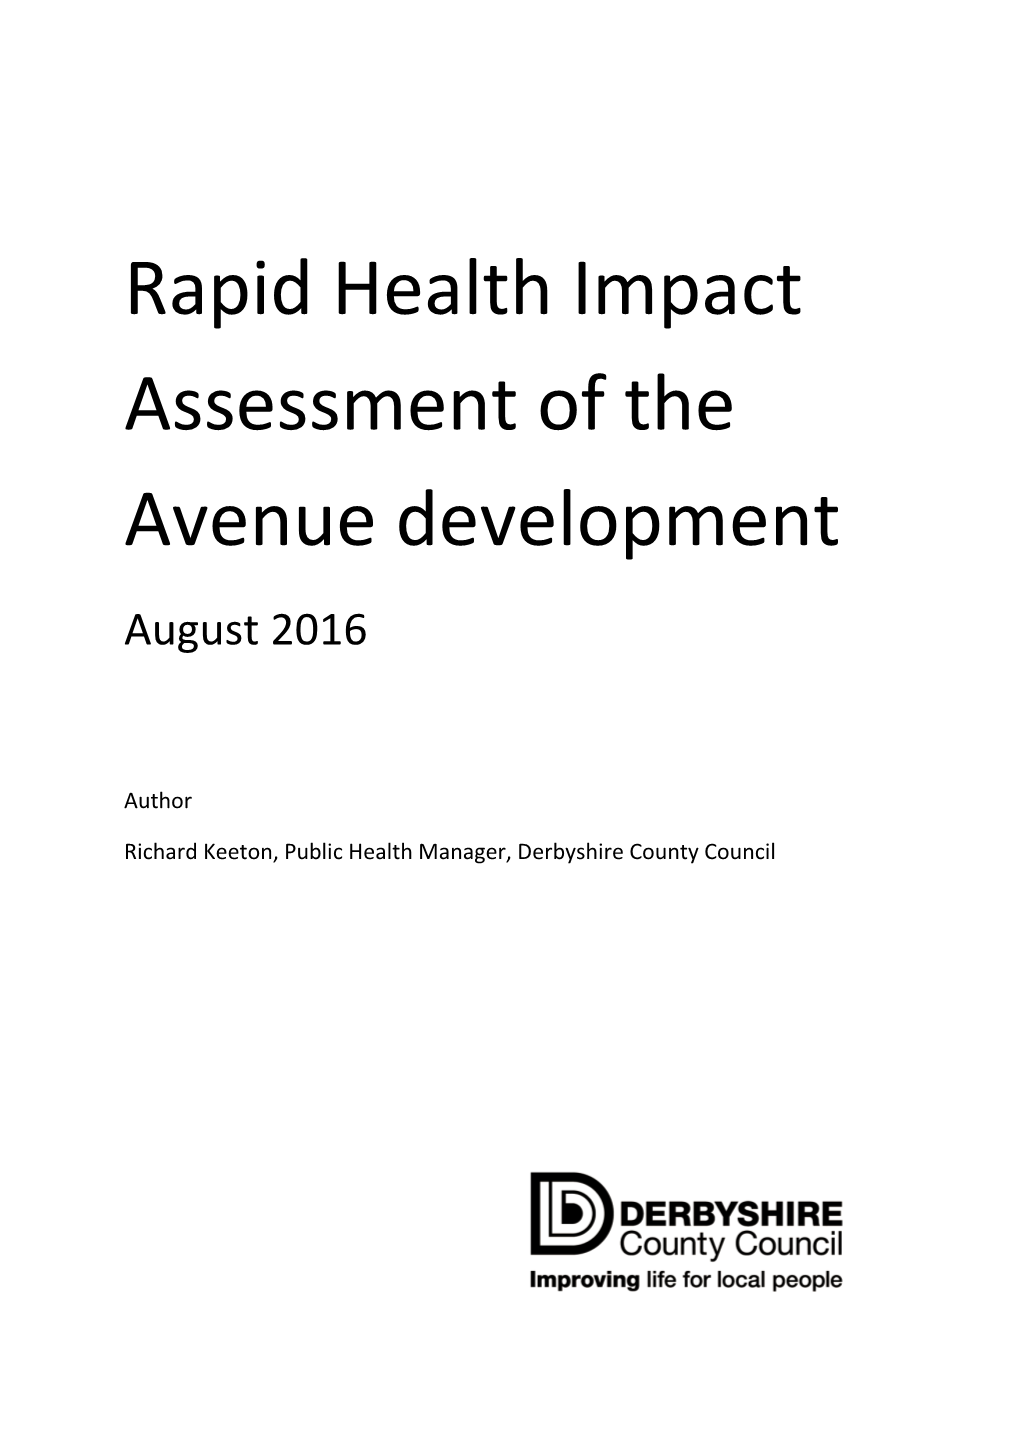 Rapid Health Impact Assessment of the Avenue Development August 2016